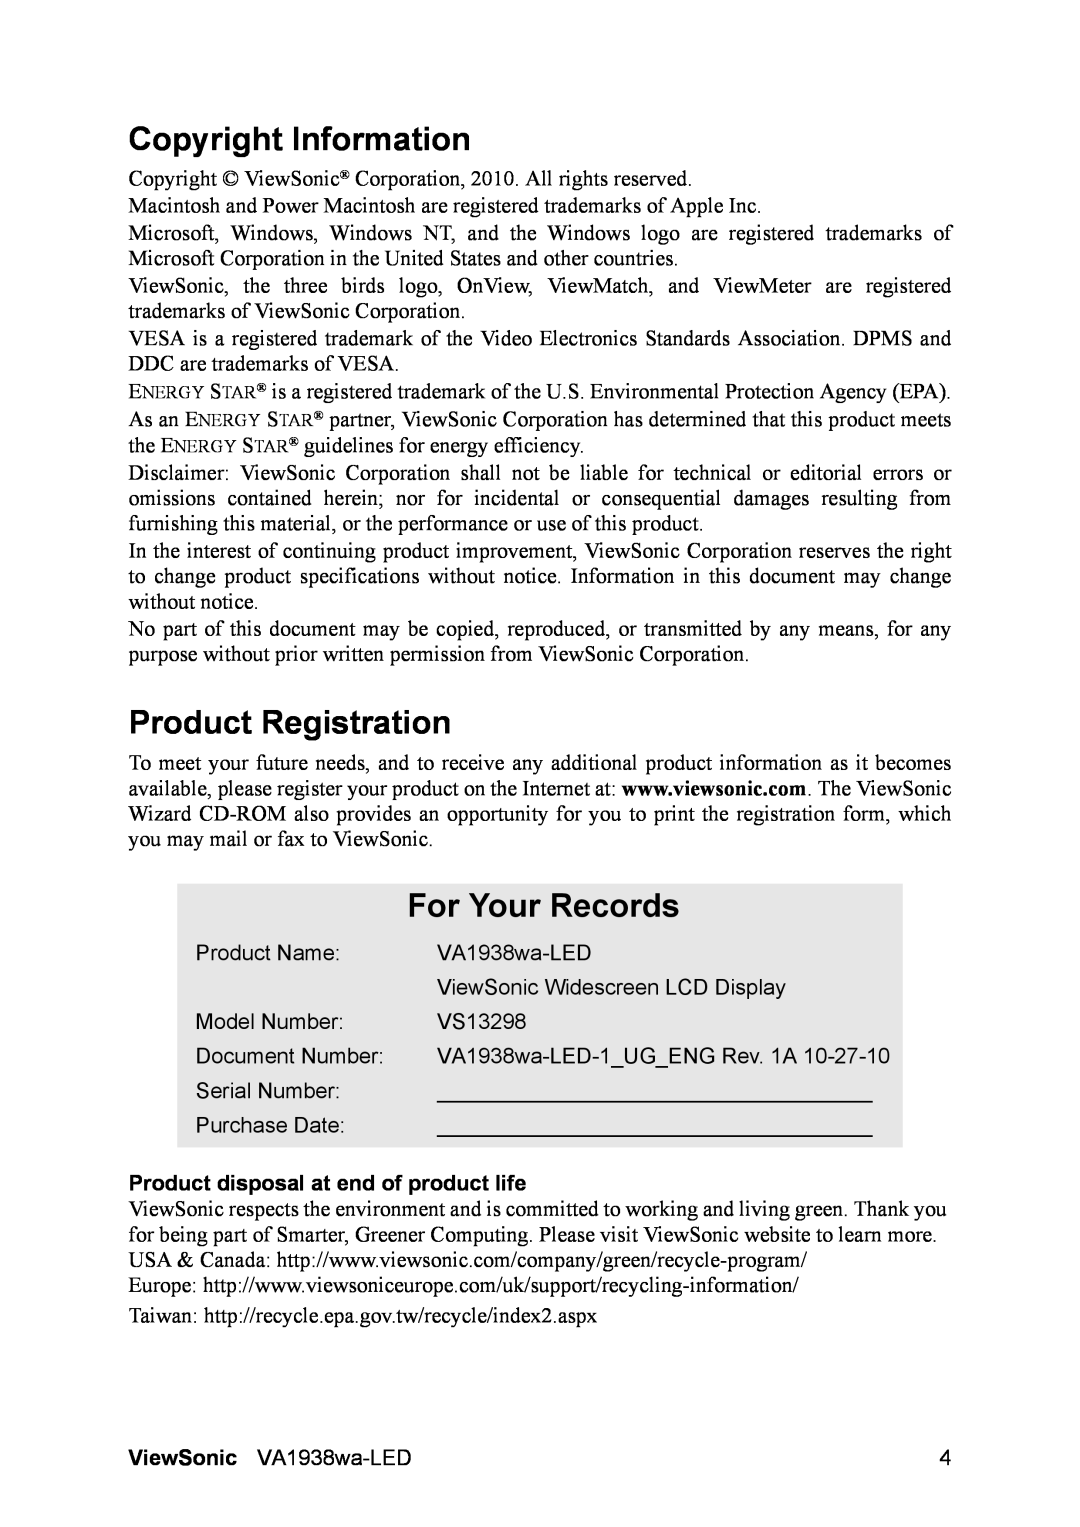 ViewSonic VA1938WA-LED warranty Copyright Information, Product Registration, For Your Records 